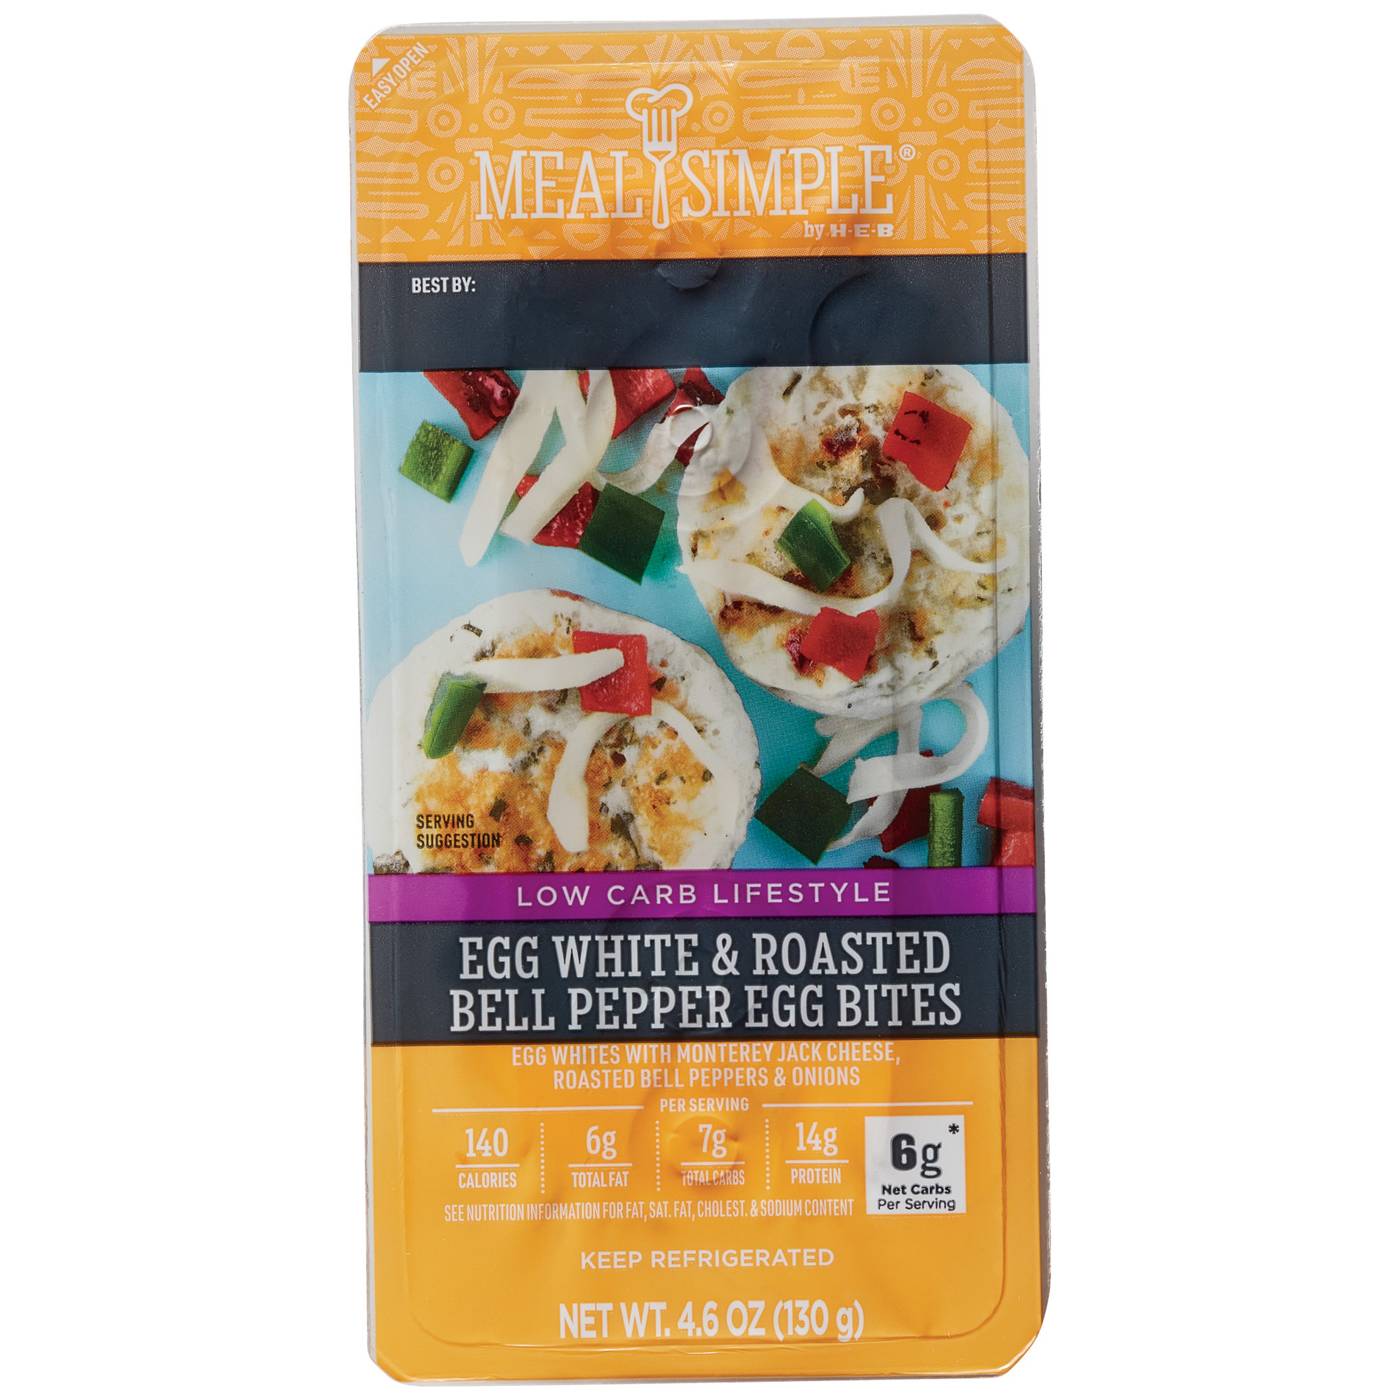 Meal Simple by H-E-B Low Carb Lifestyle Egg Bites - Egg White & Roasted Bell Pepper; image 1 of 3